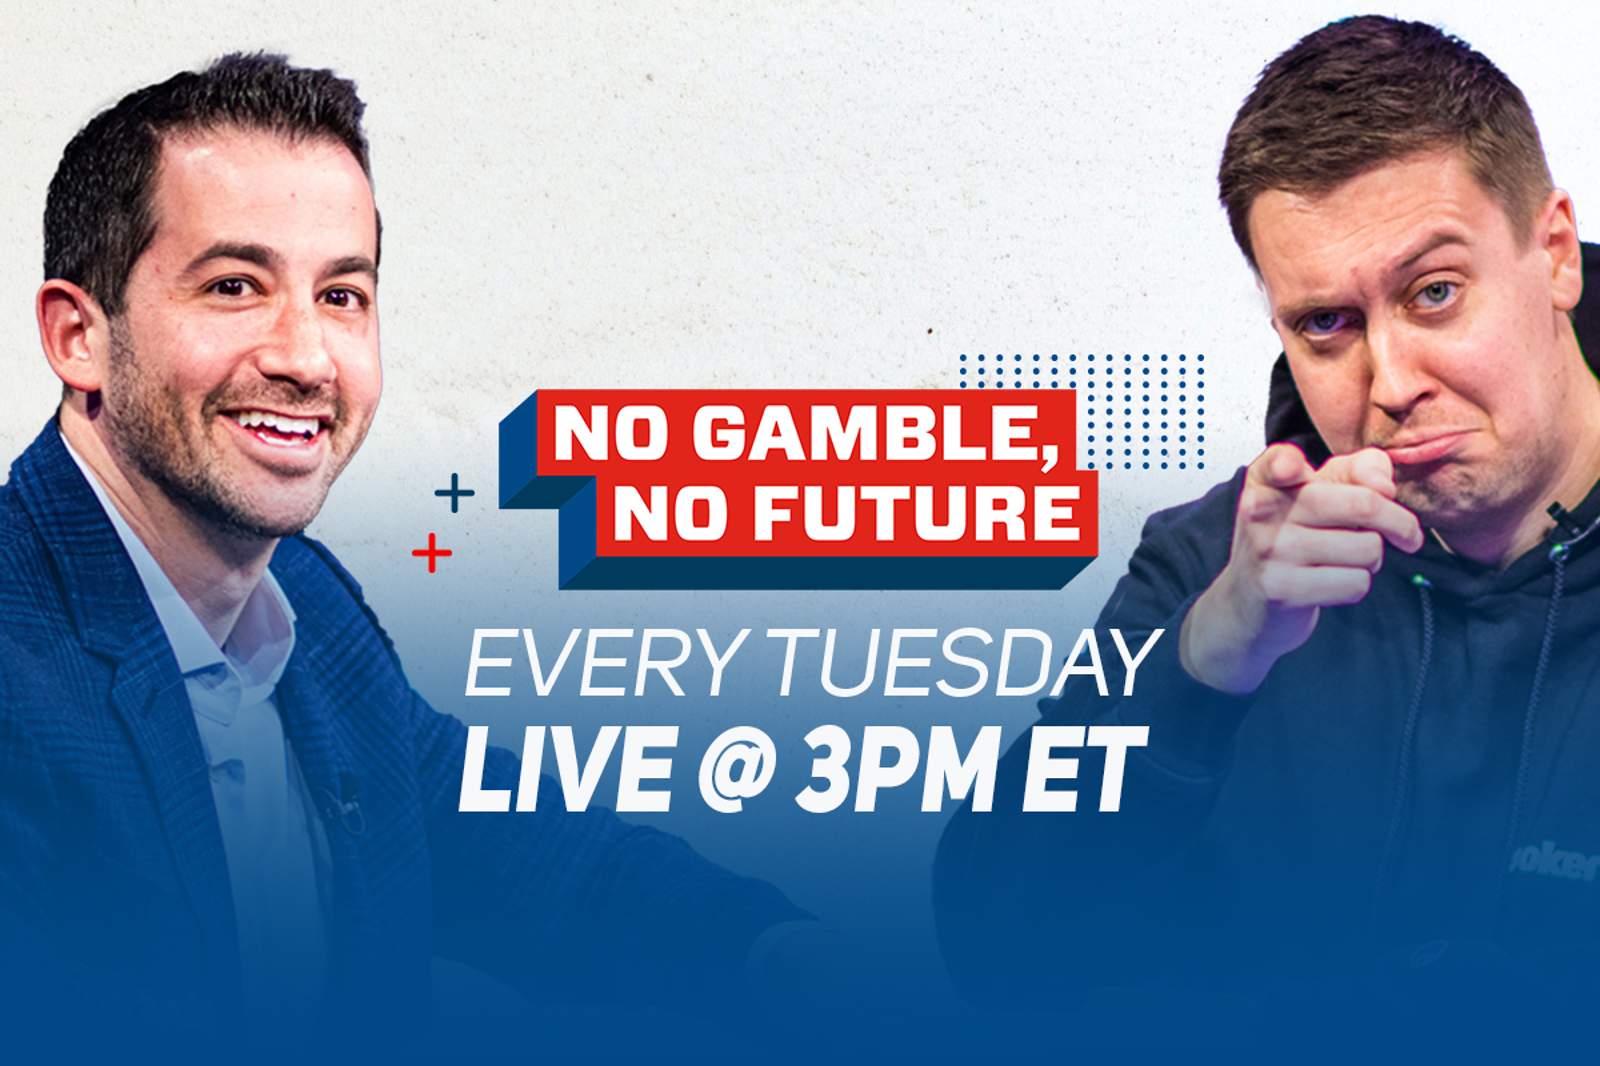 No Gamble, No Future Episode 2 on Today at 3 p.m. ET